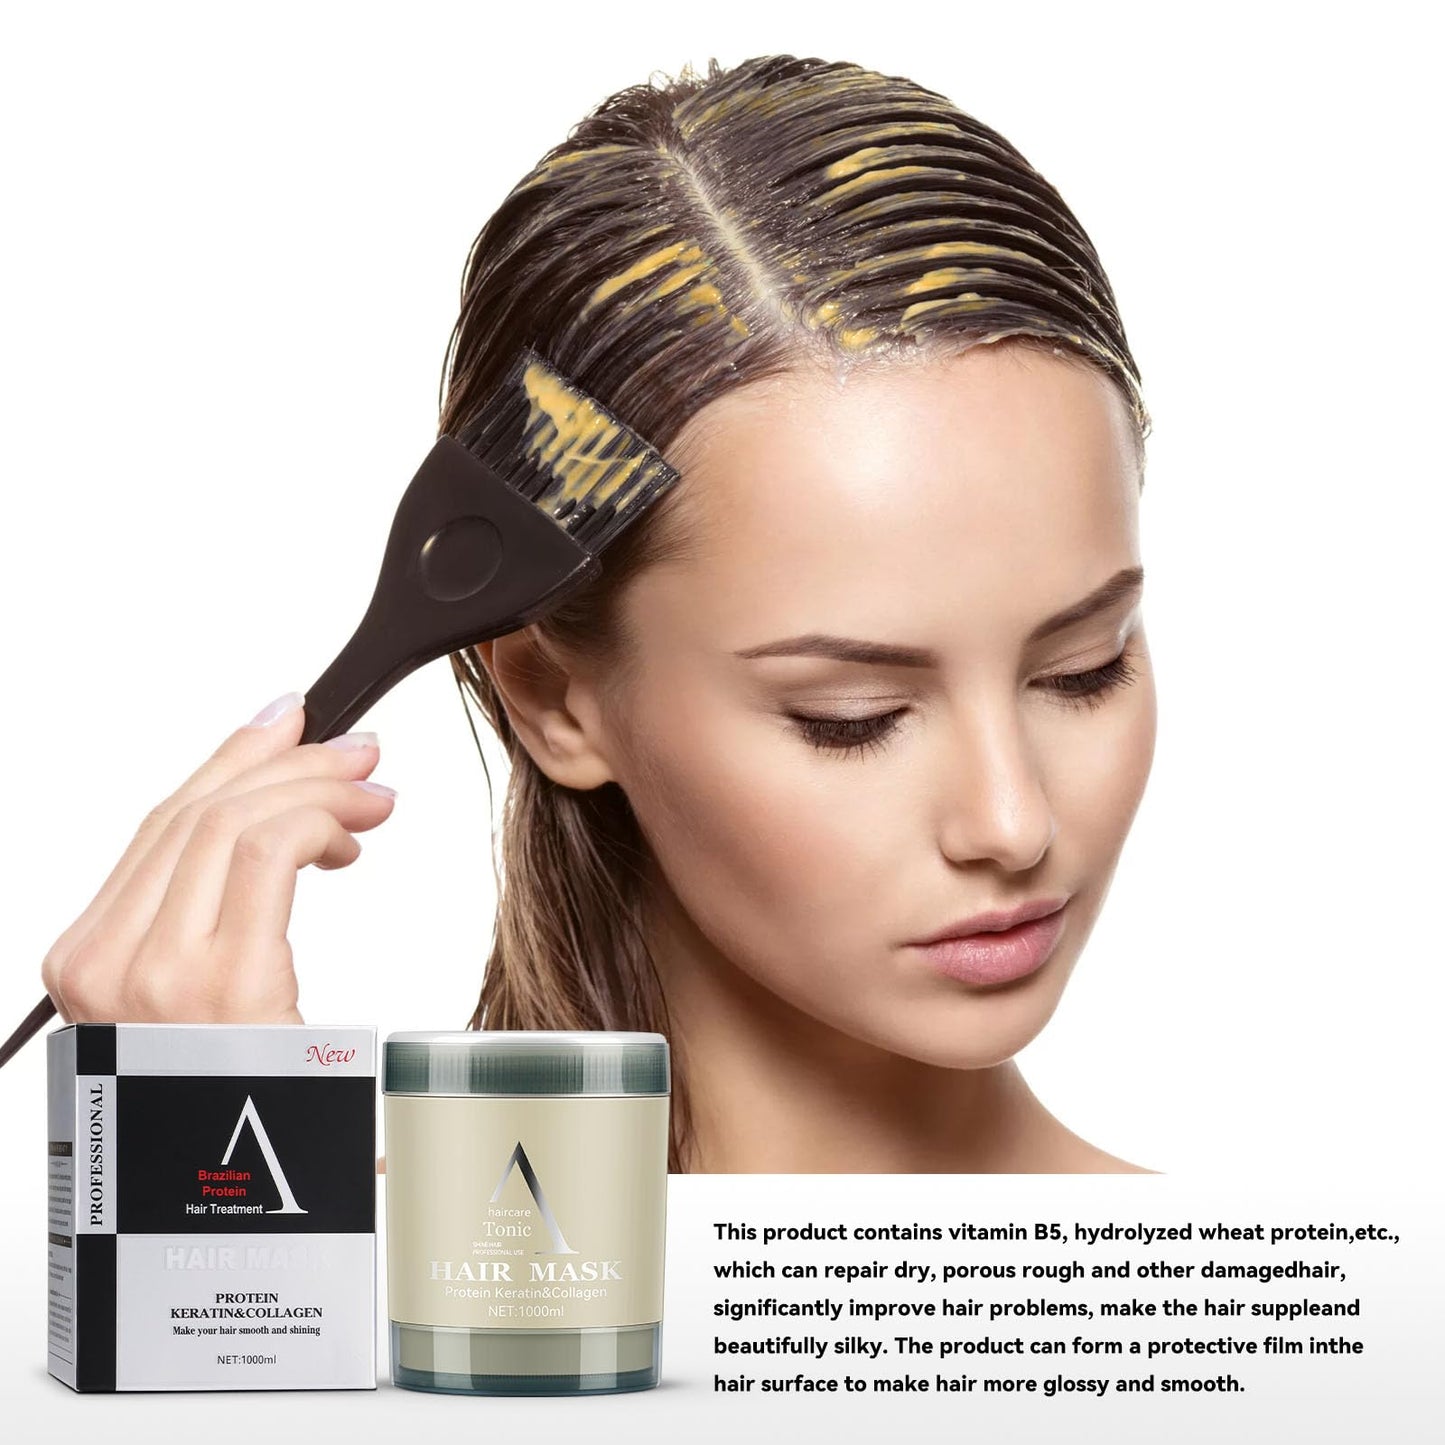 A keratin Mask Hair Mask with BOTOX Keratin and Collagen Protein 1000ML